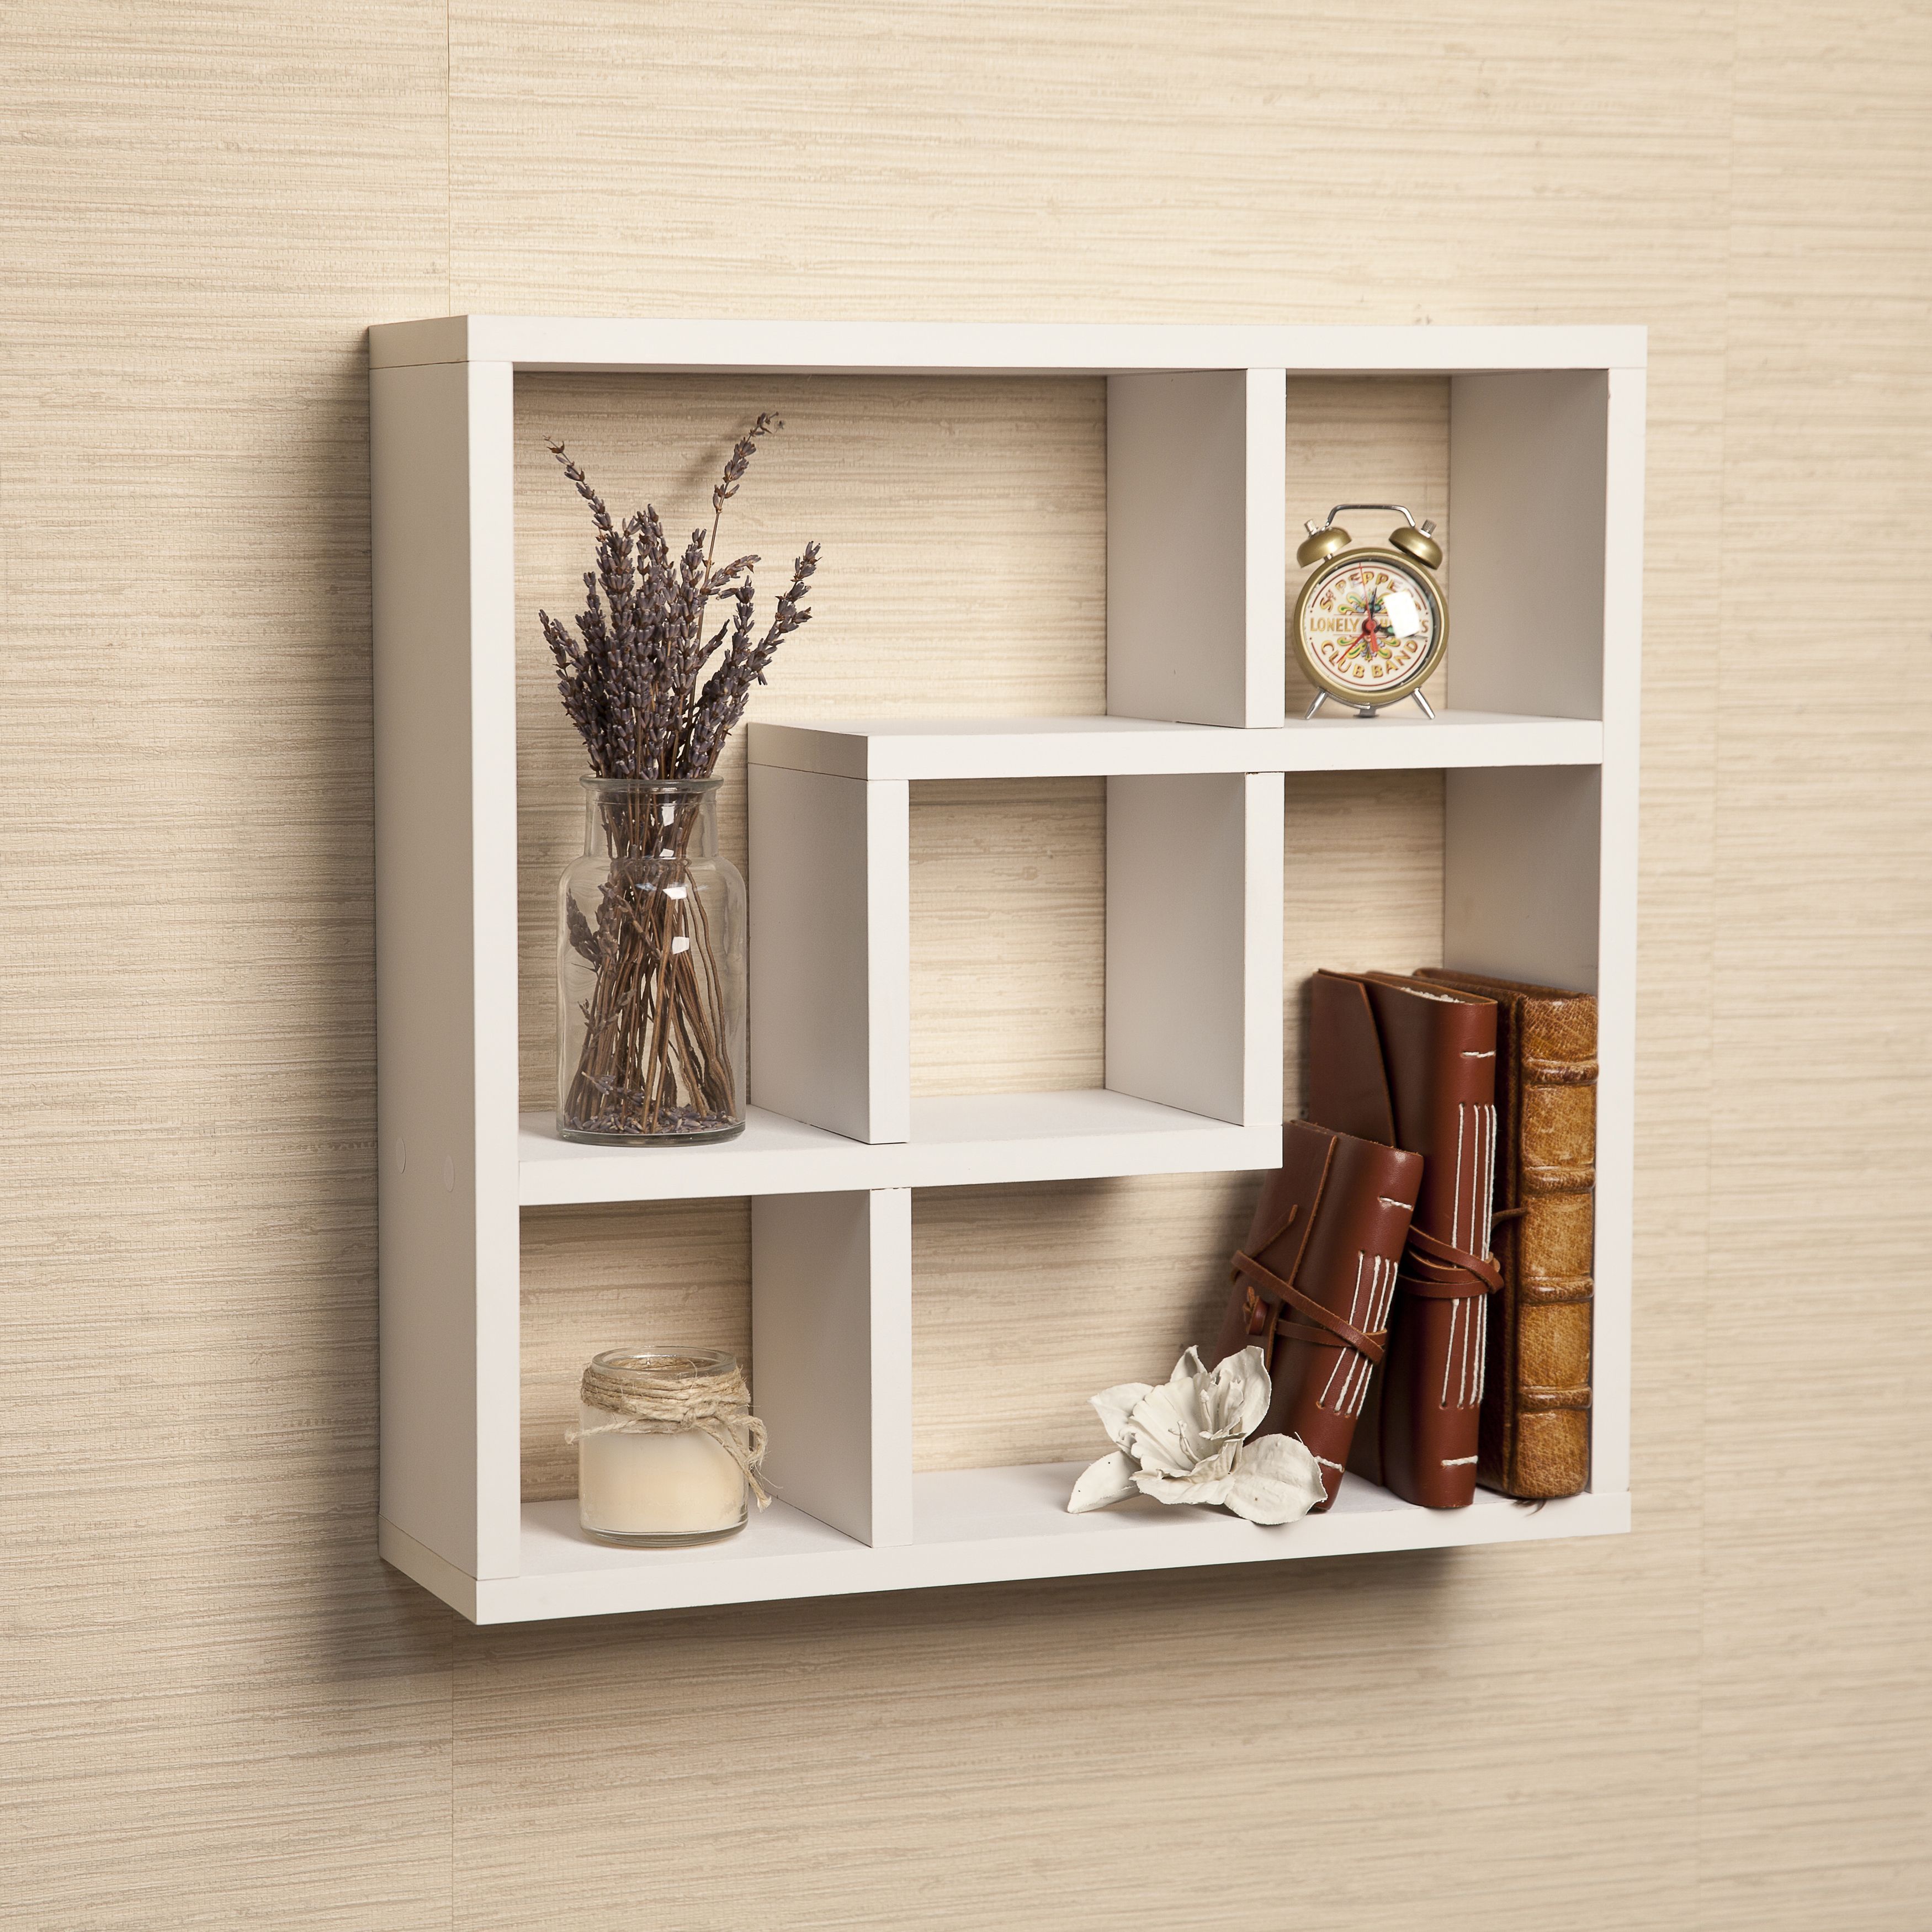 this decorative floating wall shelf geometric pattern has configurations openings different clean and mini stic look will frame your ikea bathroom units diy projects shoe